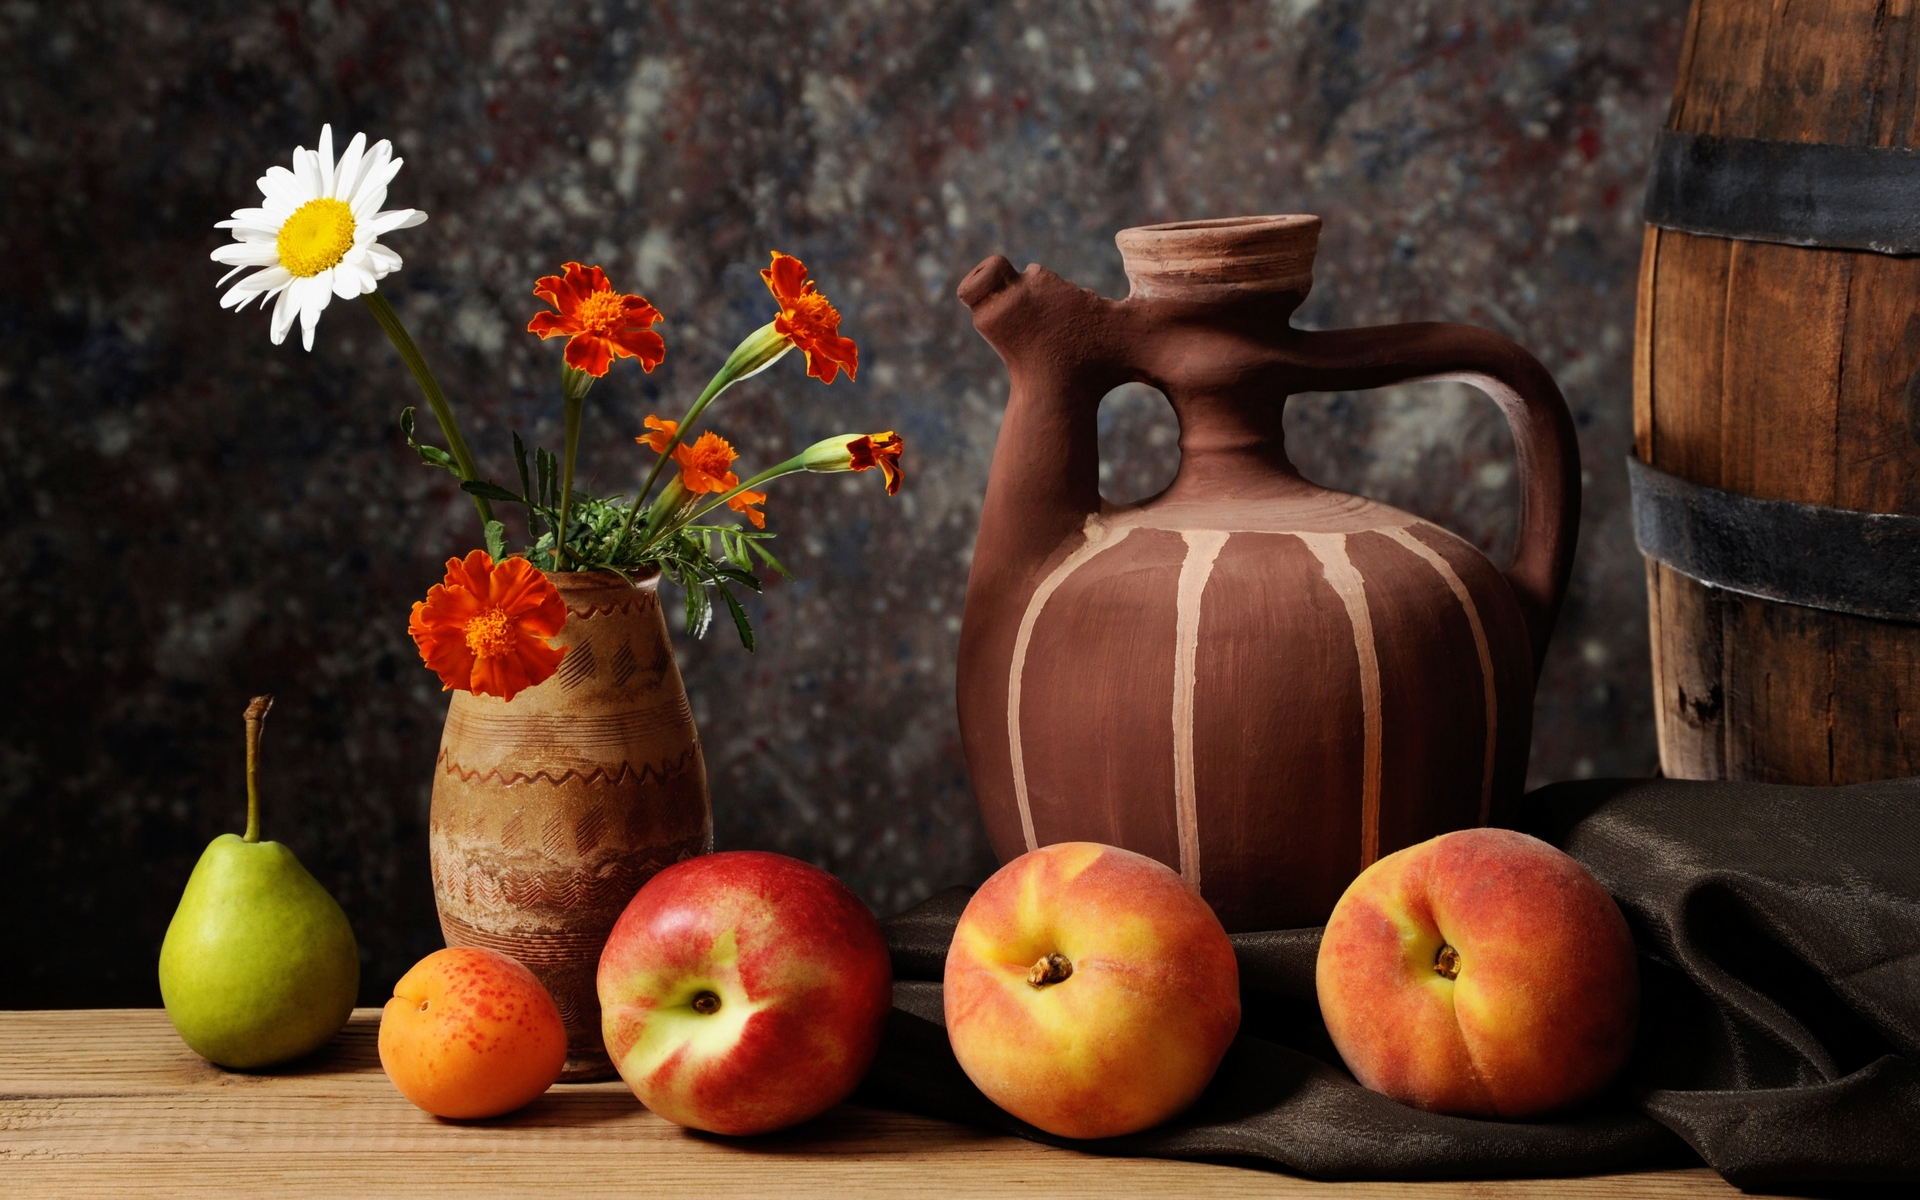 photography, Dishes, Jug, Pitcher, Fruit, Pears, Apricots, Nectarines, Peaches, Pitcher, Vase, Daisy, Marigold, Still, Life Wallpaper